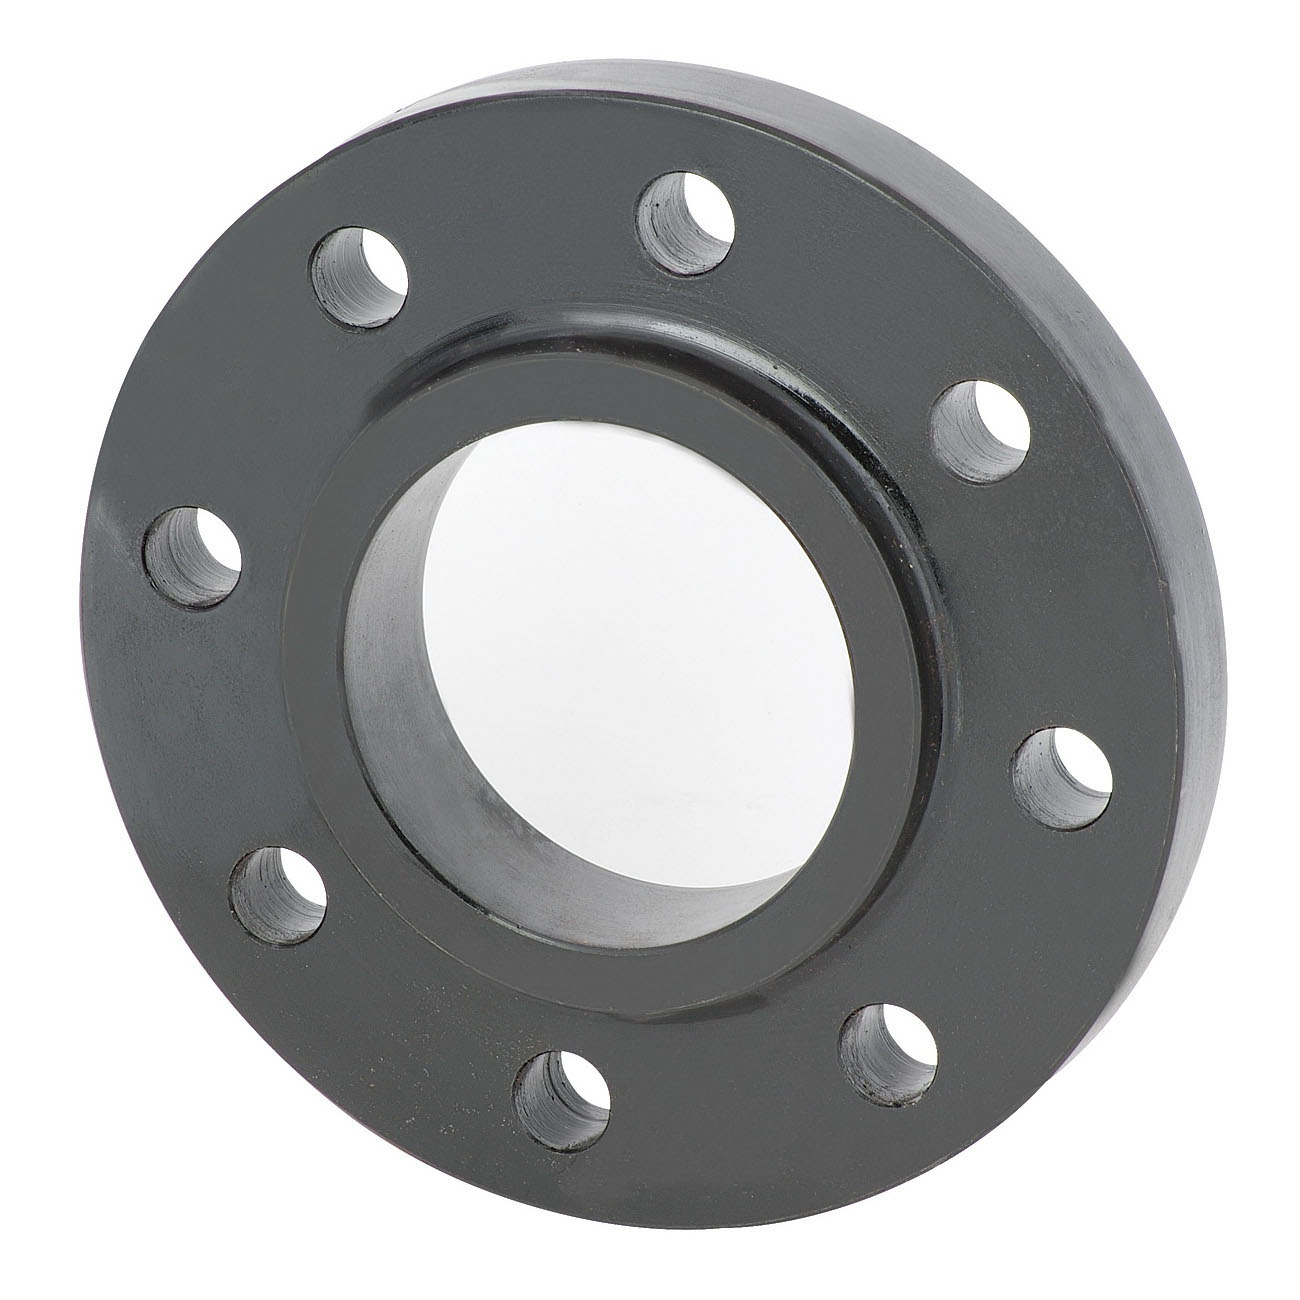 Matco-Norca&trade; MN300SF10 Raised Face Slip-On Flange, 3 in, Carbon Steel, 300 lb